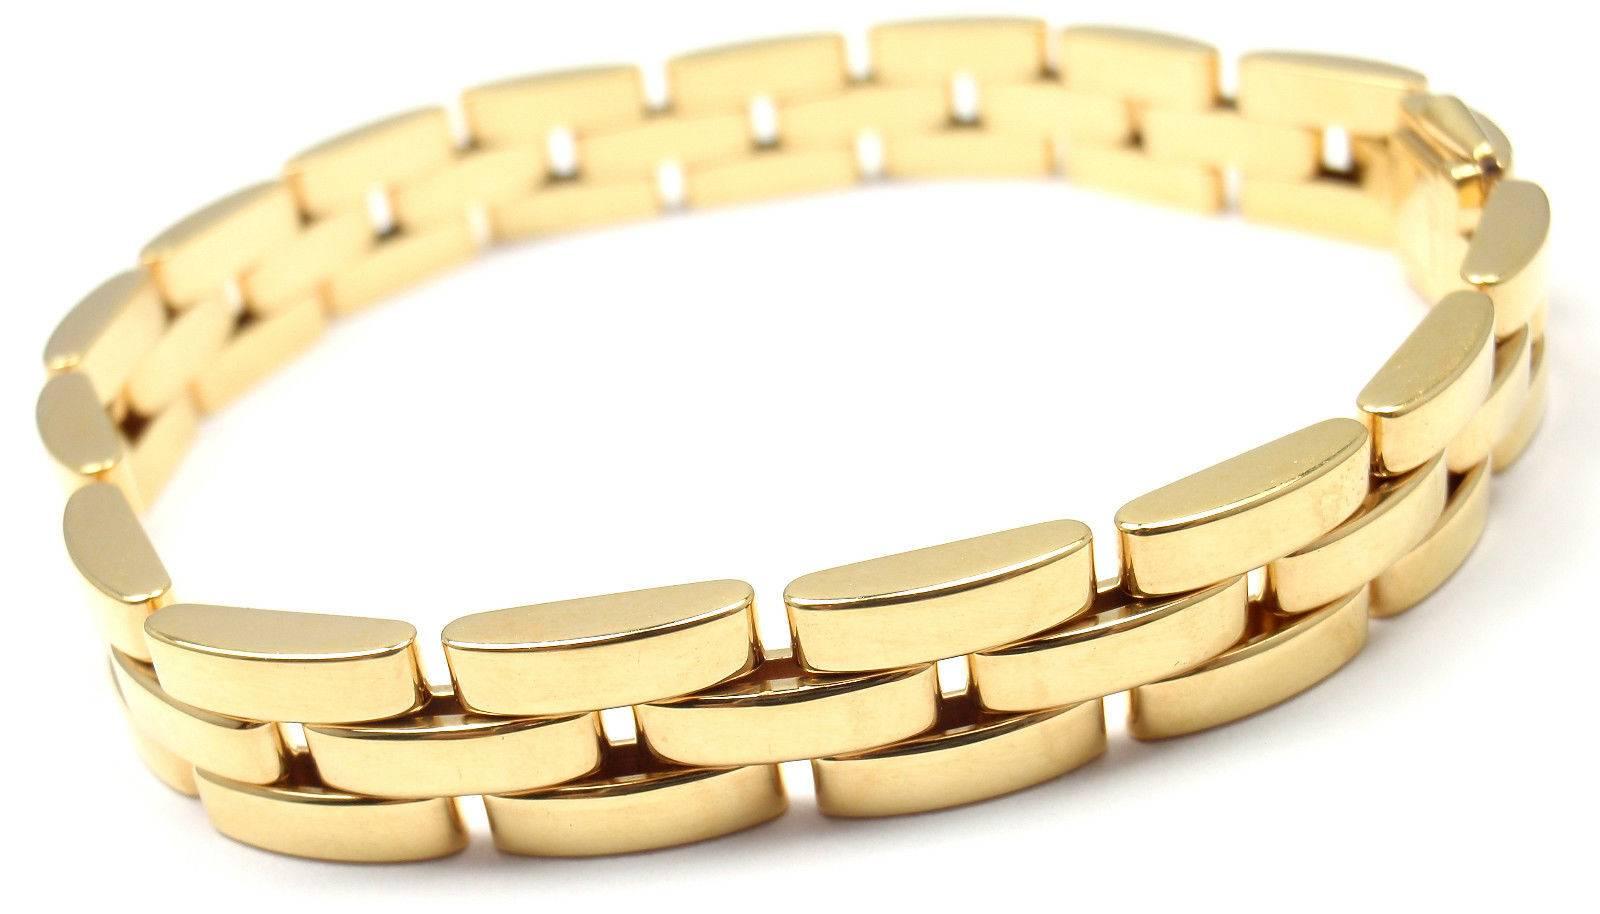 18k Yellow Gold Maillon Panthere 3-Row Link Bracelet by Cartier. 
This lovely bracelet is in mint condition and it comes with original Cartier certificate and a Cartier box.

Measurements: 
Length: 7 1/4